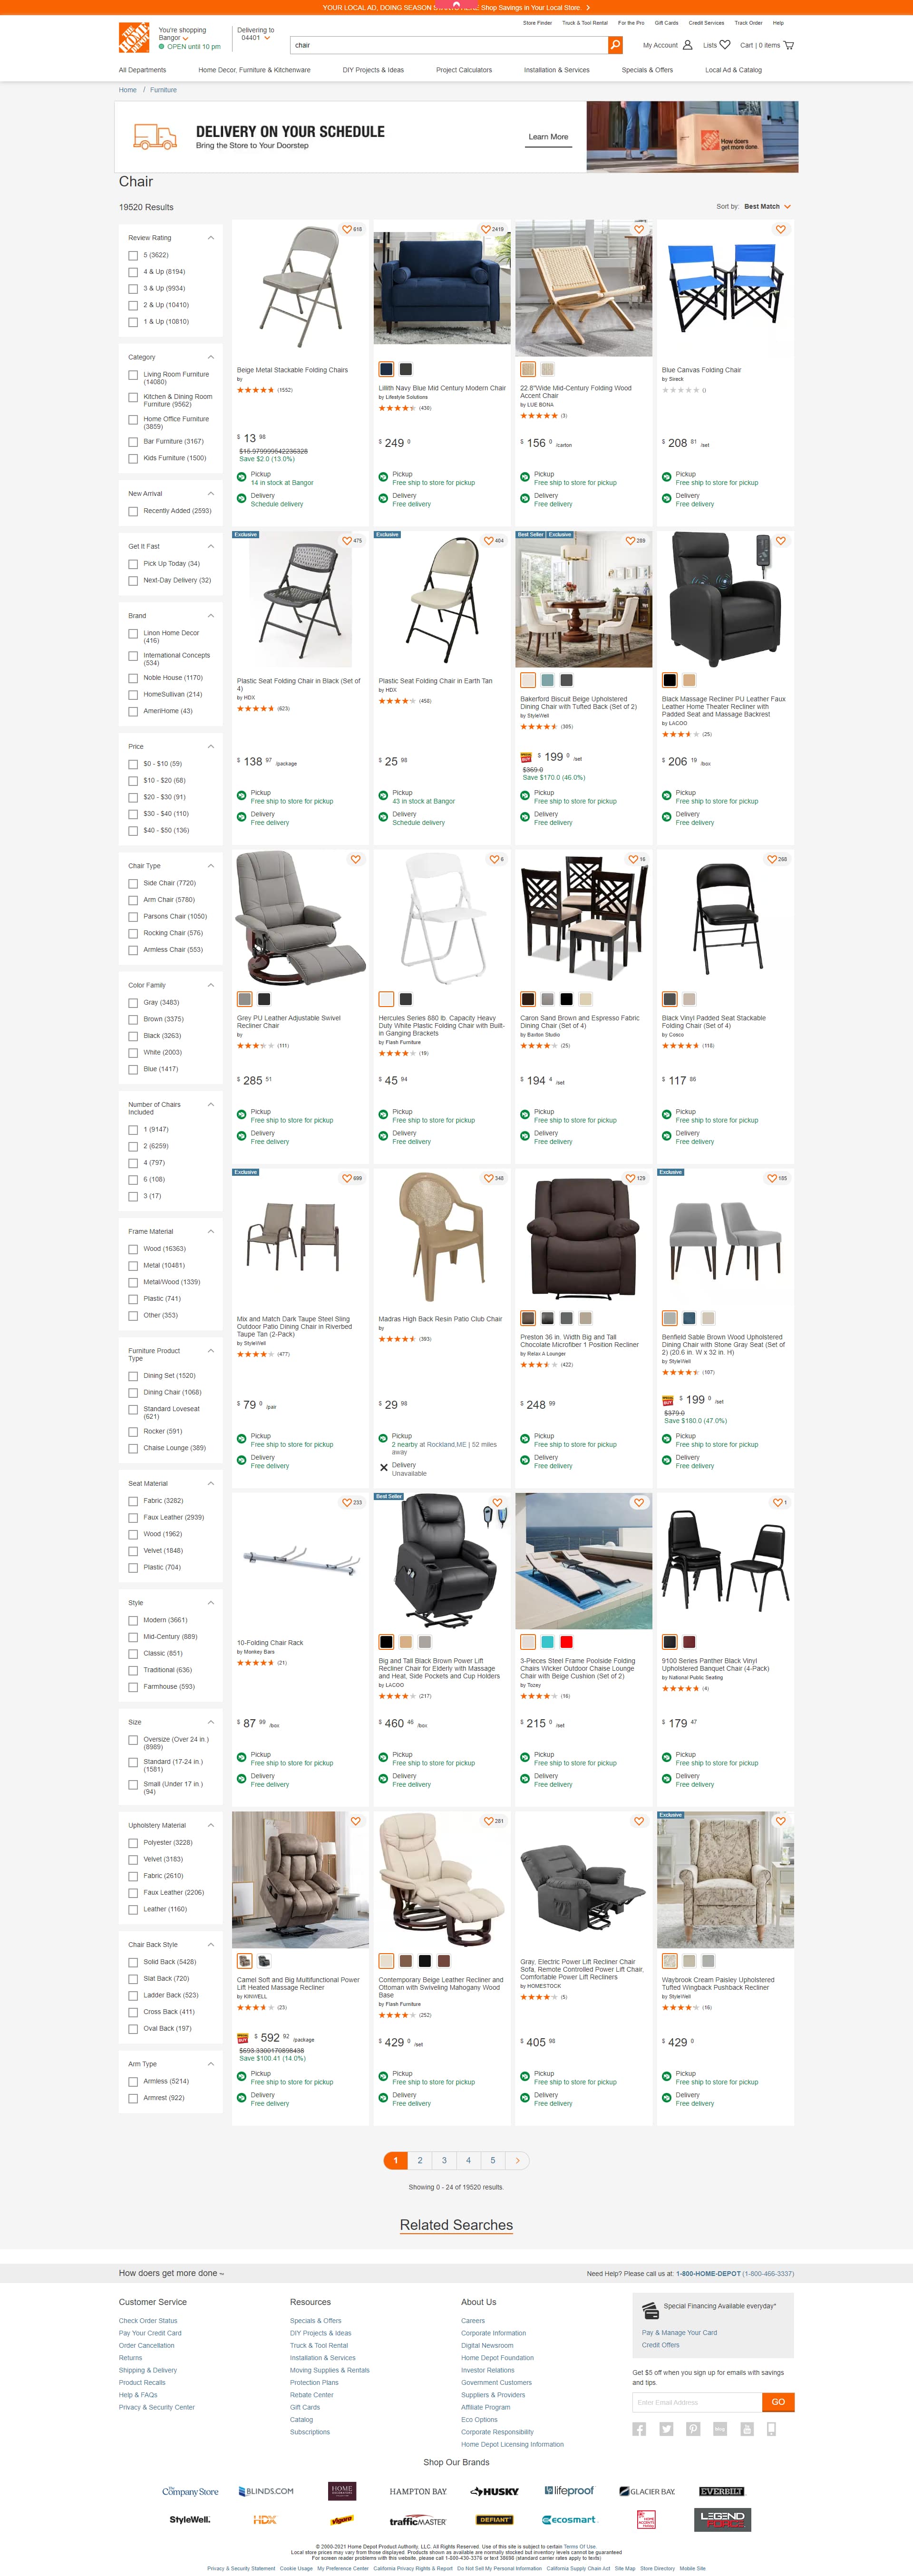 Example results for q: chair (the Home Depot US)